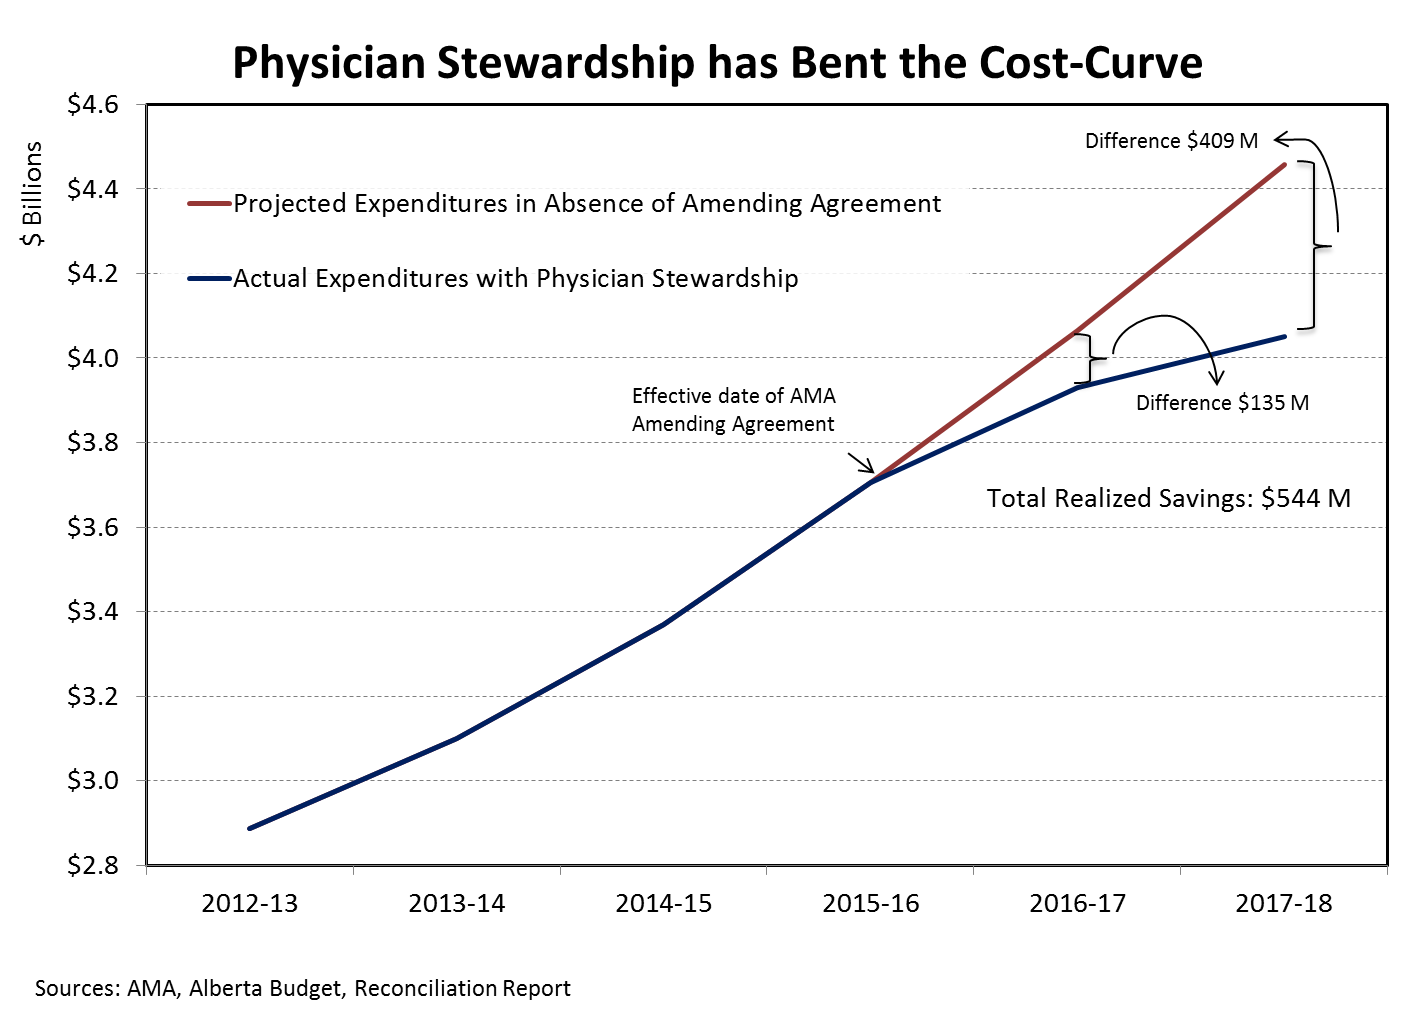 Physician Stewardship has Bent the Cost-curve